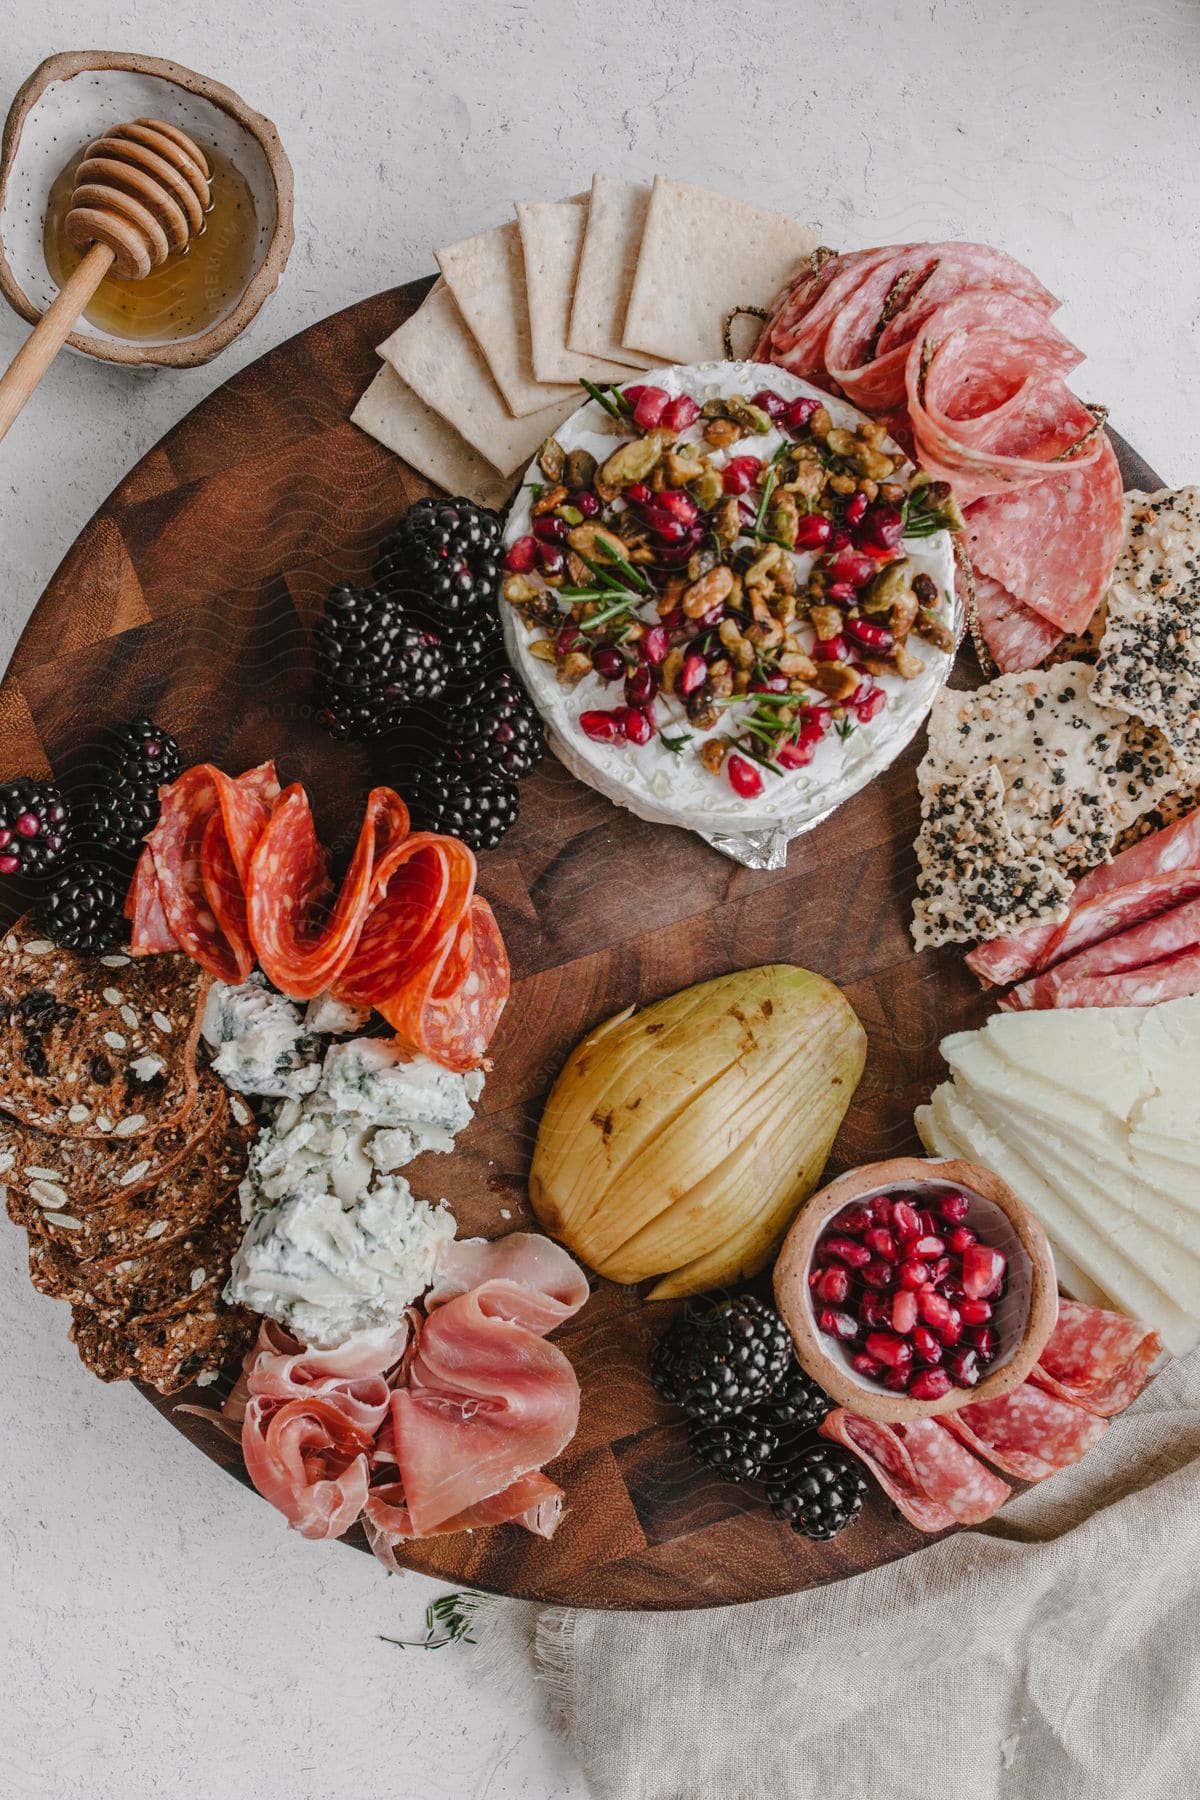 A wooden board with a variety of fruits and cold cuts creating a healthy meal